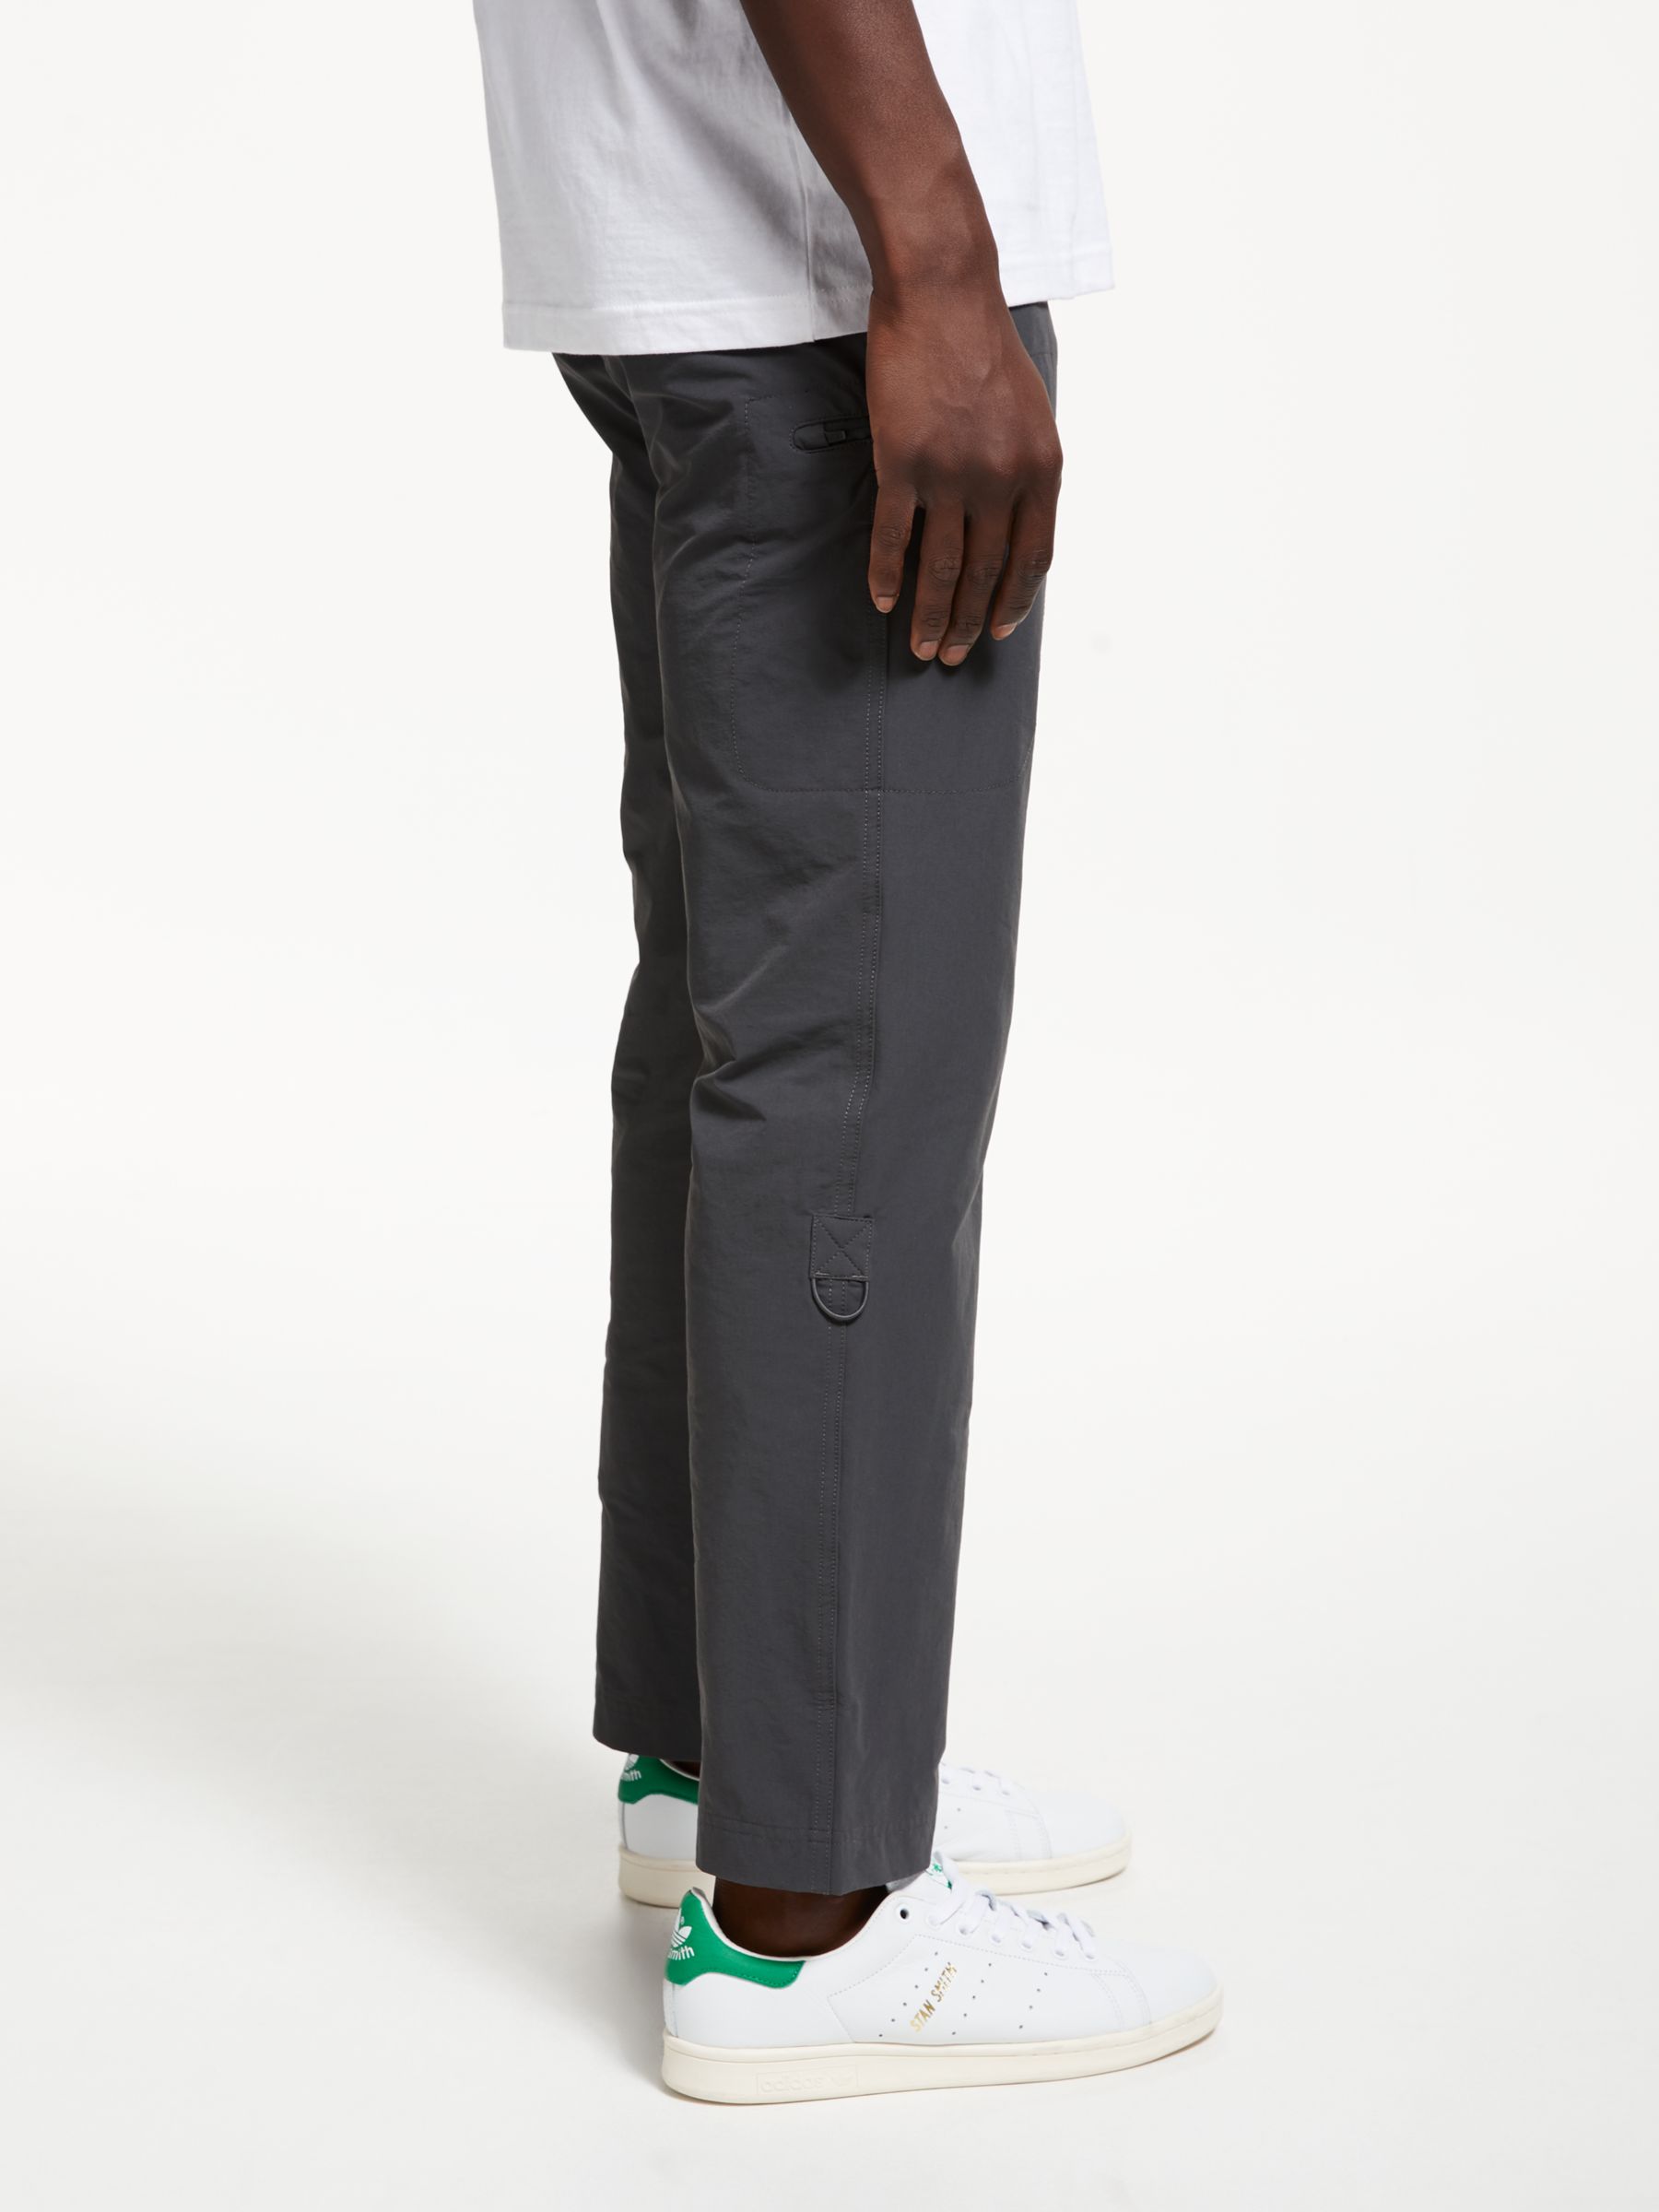 north face grey trousers